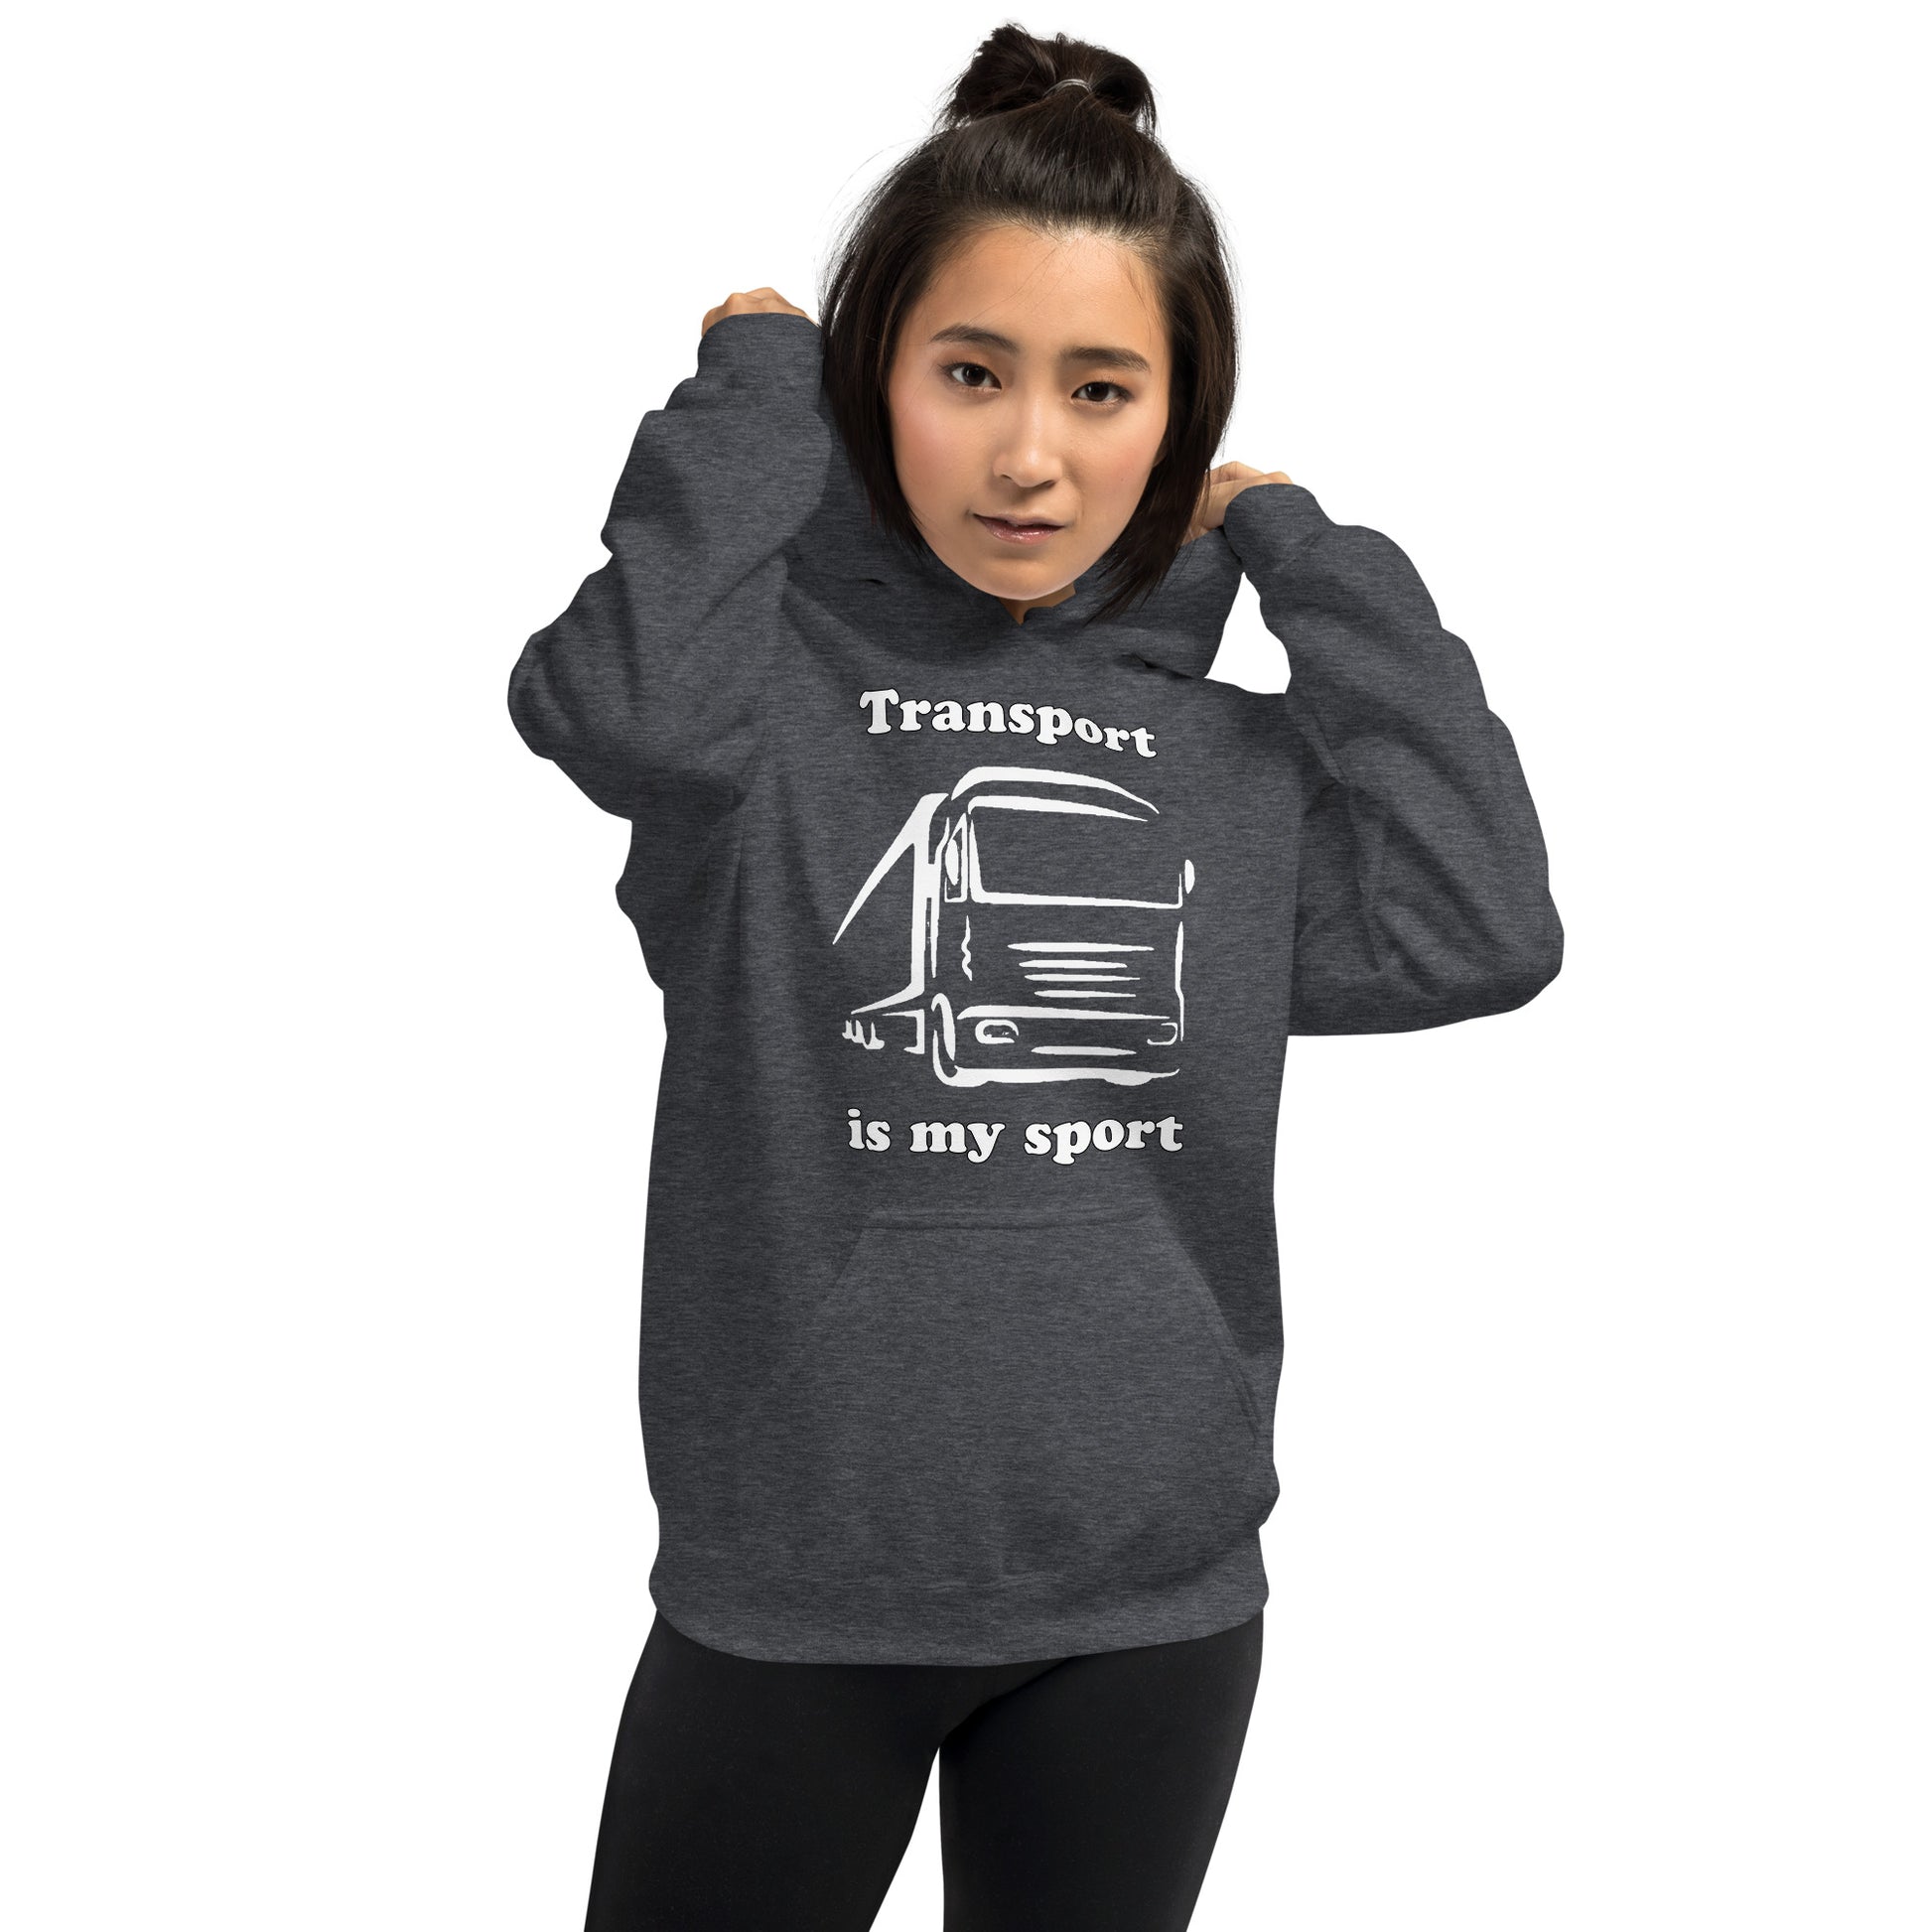 Woman with grey hoodie with picture of truck and text "Transport is my sport"